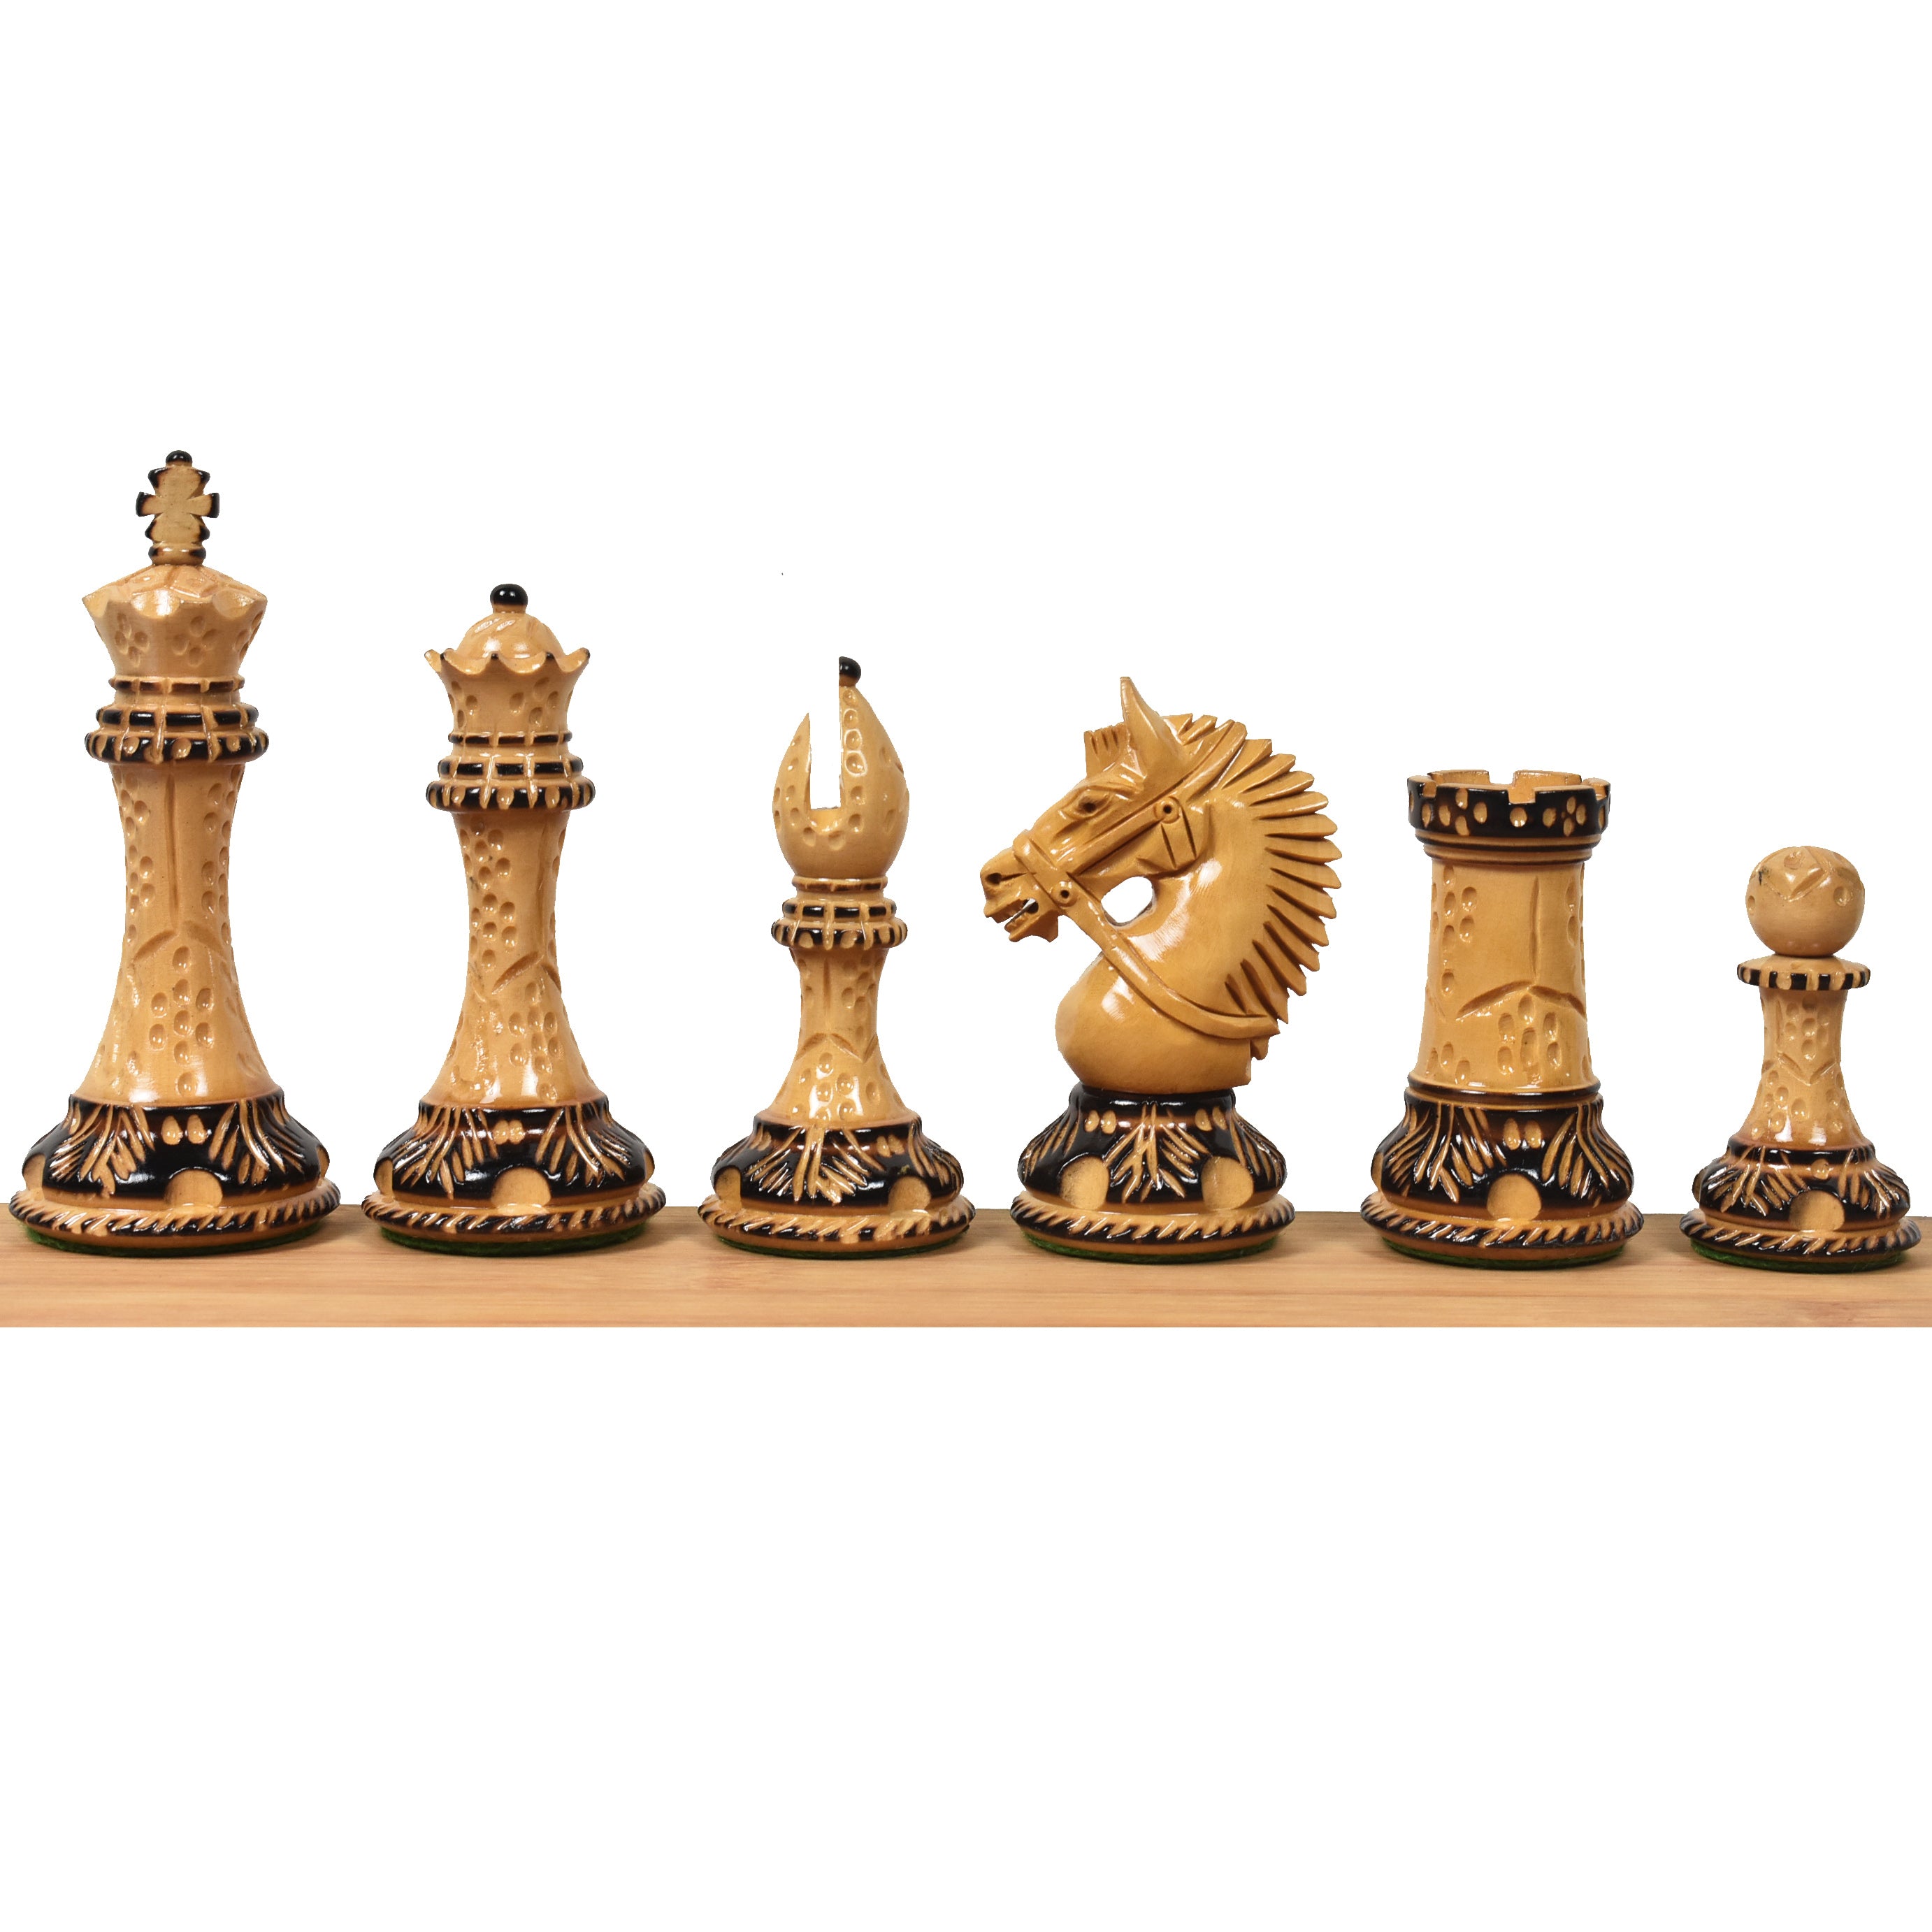 4.2" American Staunton Luxury Chess Set Combo - Pieces in Weighted Boxwood with Board and Box